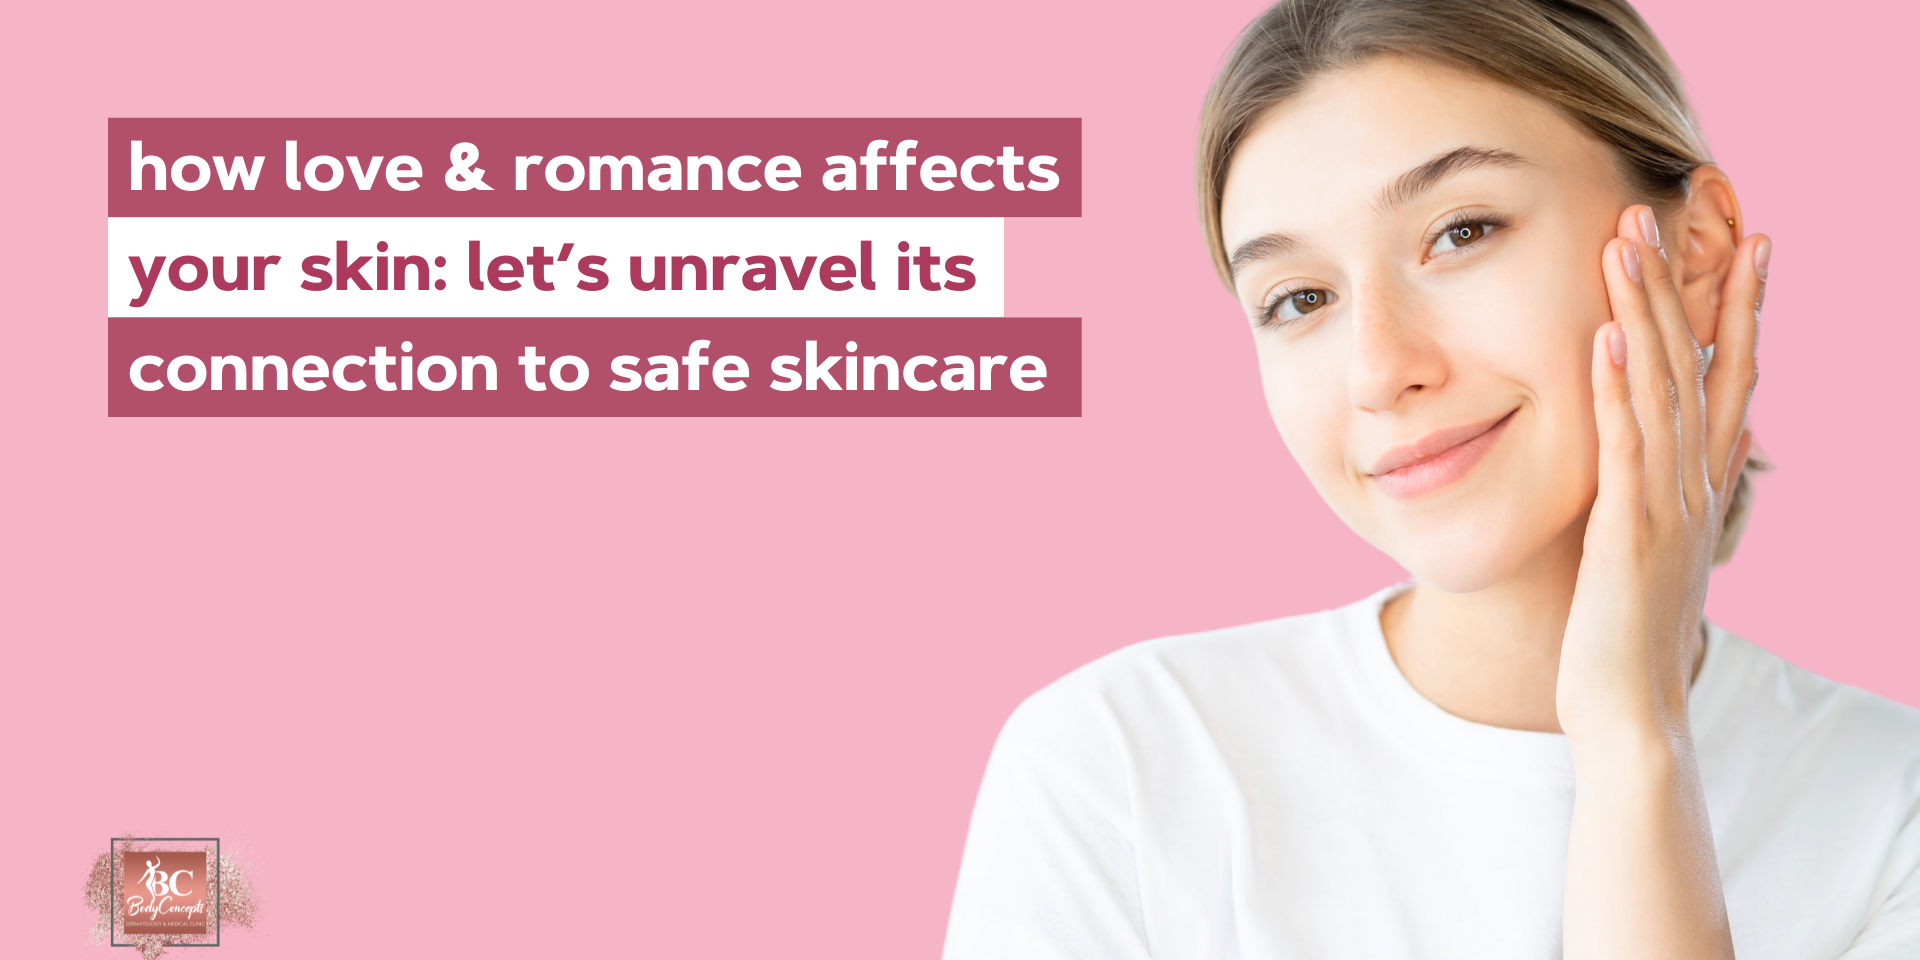 navigating the skincare challenges presented by the El Niño season requires a strategic approach tailored to the unique environmental conditions.